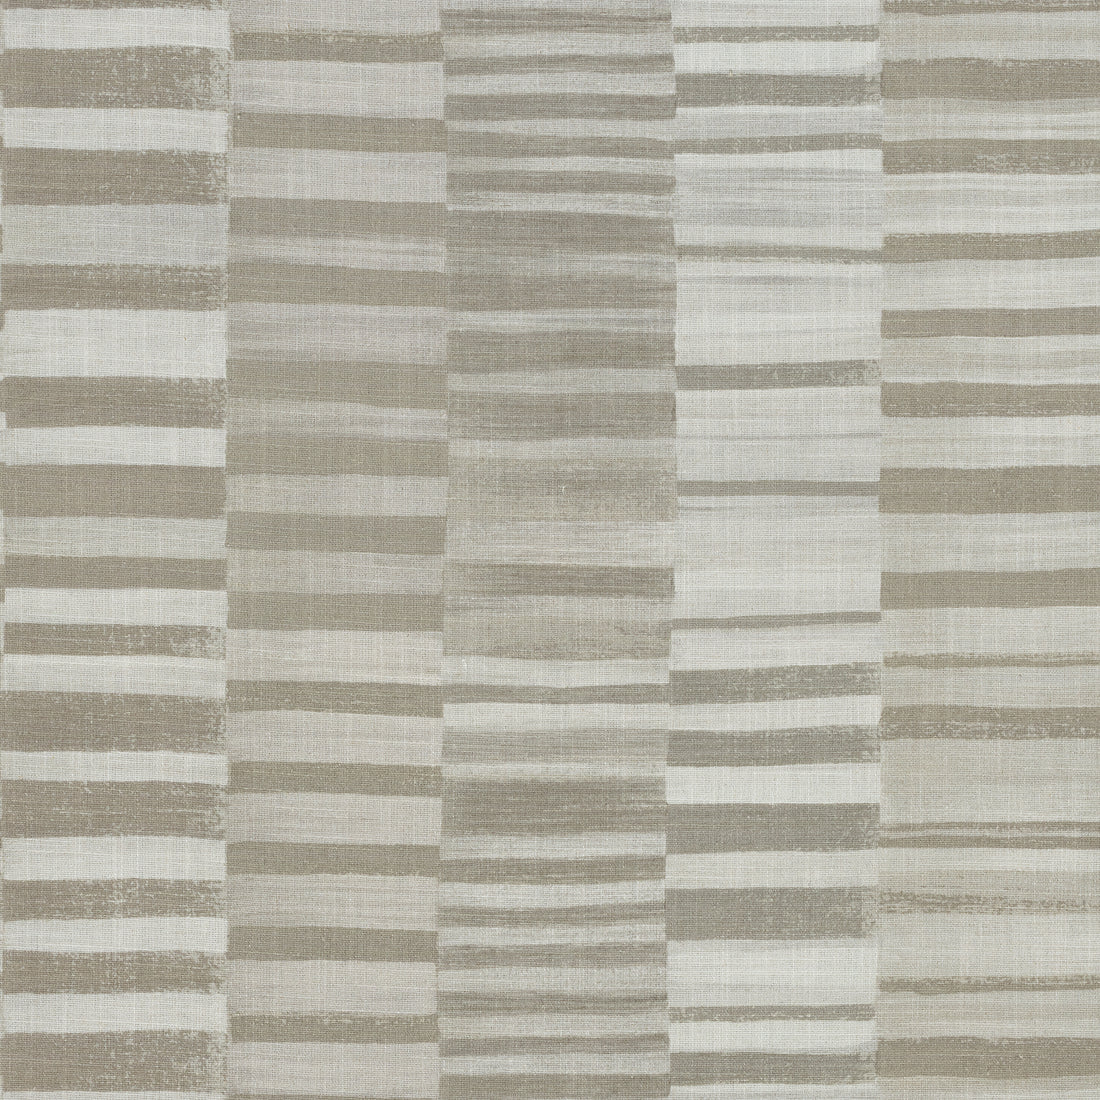 Tansman fabric in flax color - pattern number AF78735 - by Anna French in the Palampore collection